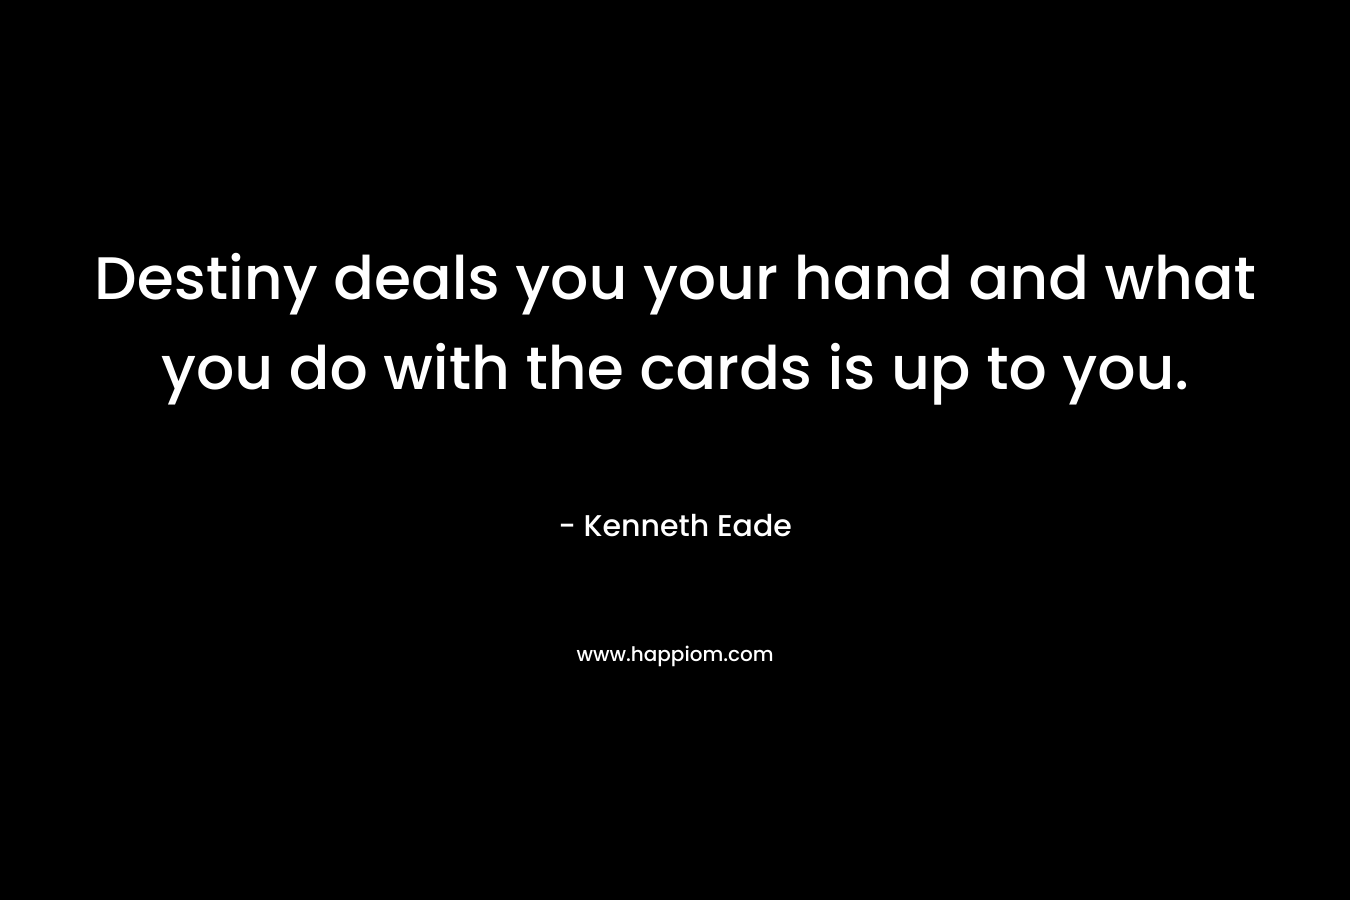 Destiny deals you your hand and what you do with the cards is up to you.